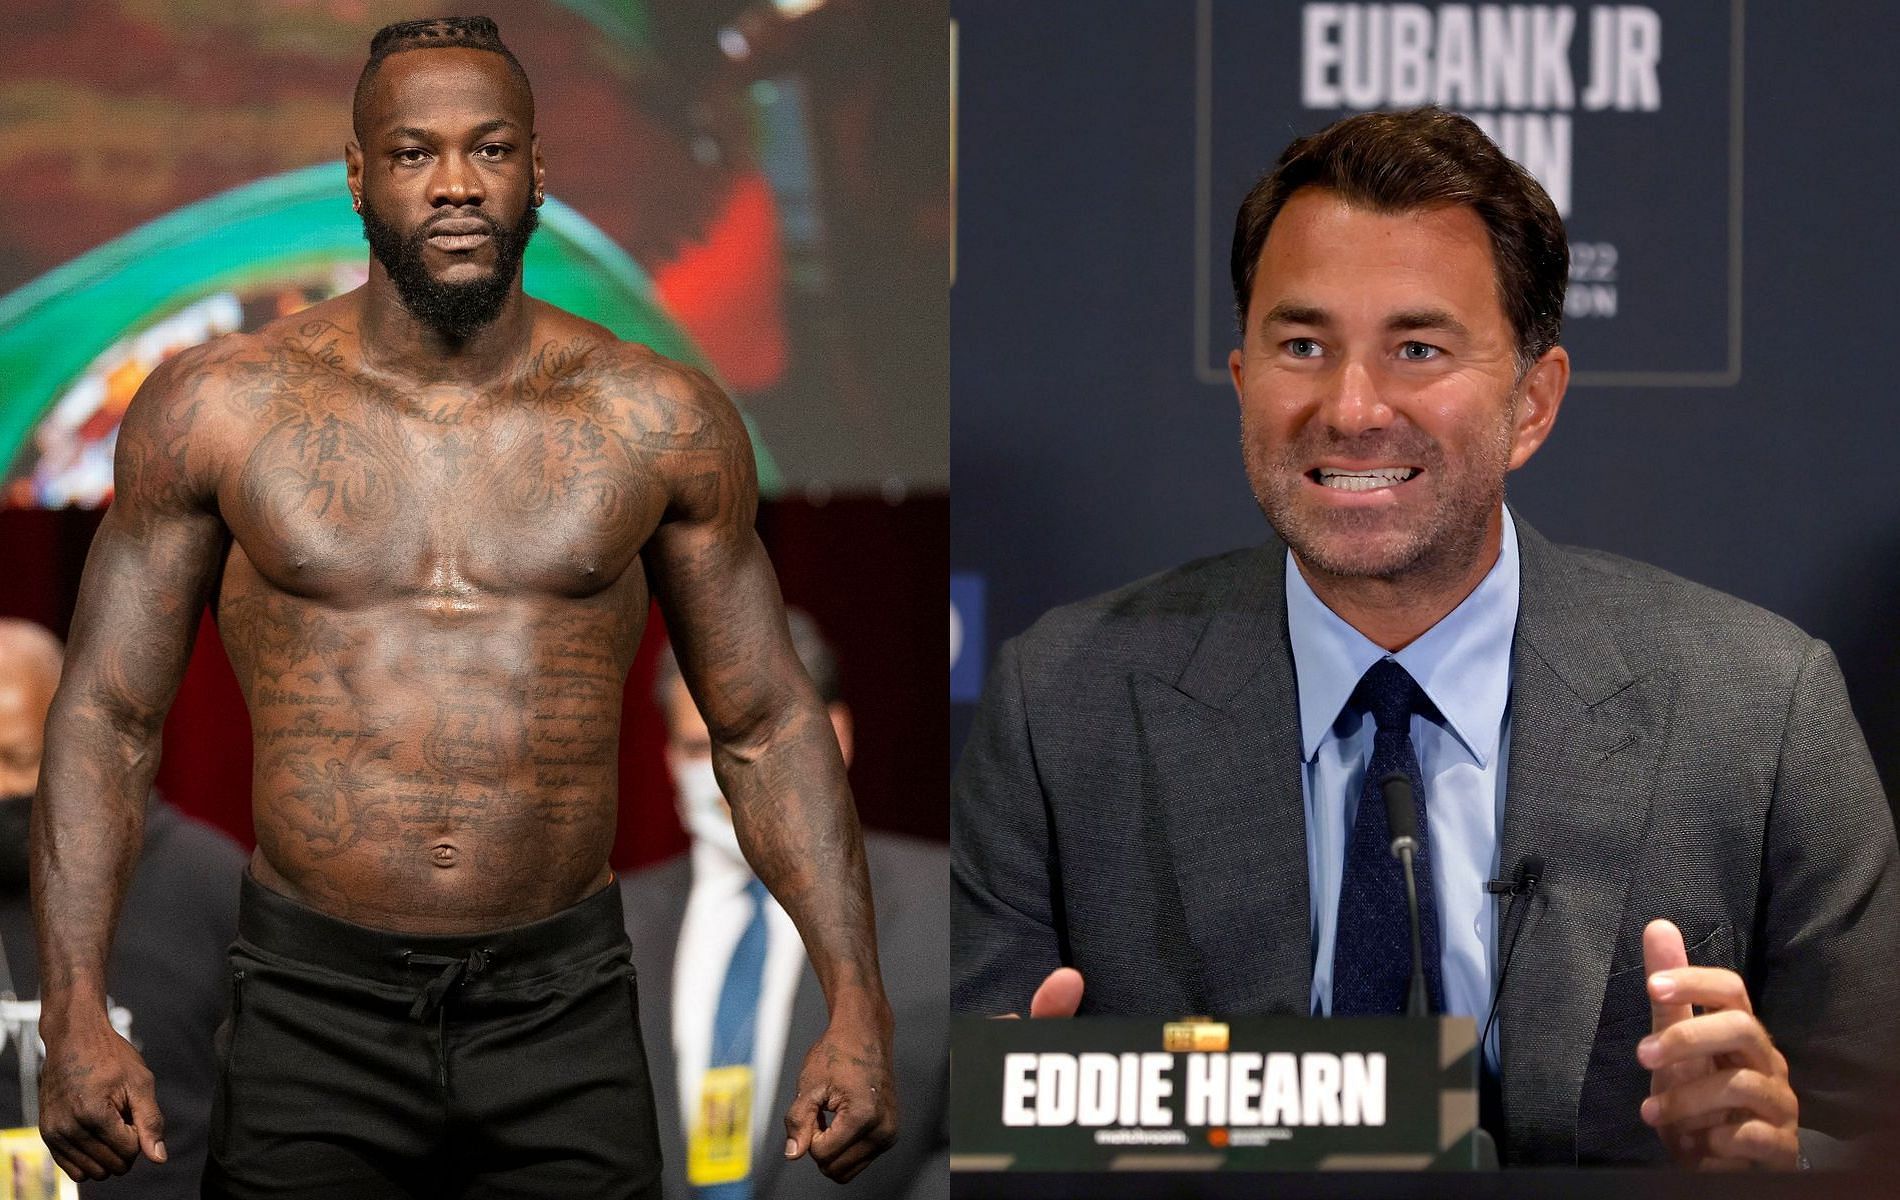 Deontay Wilder (left) and Eddie Hearn (right)